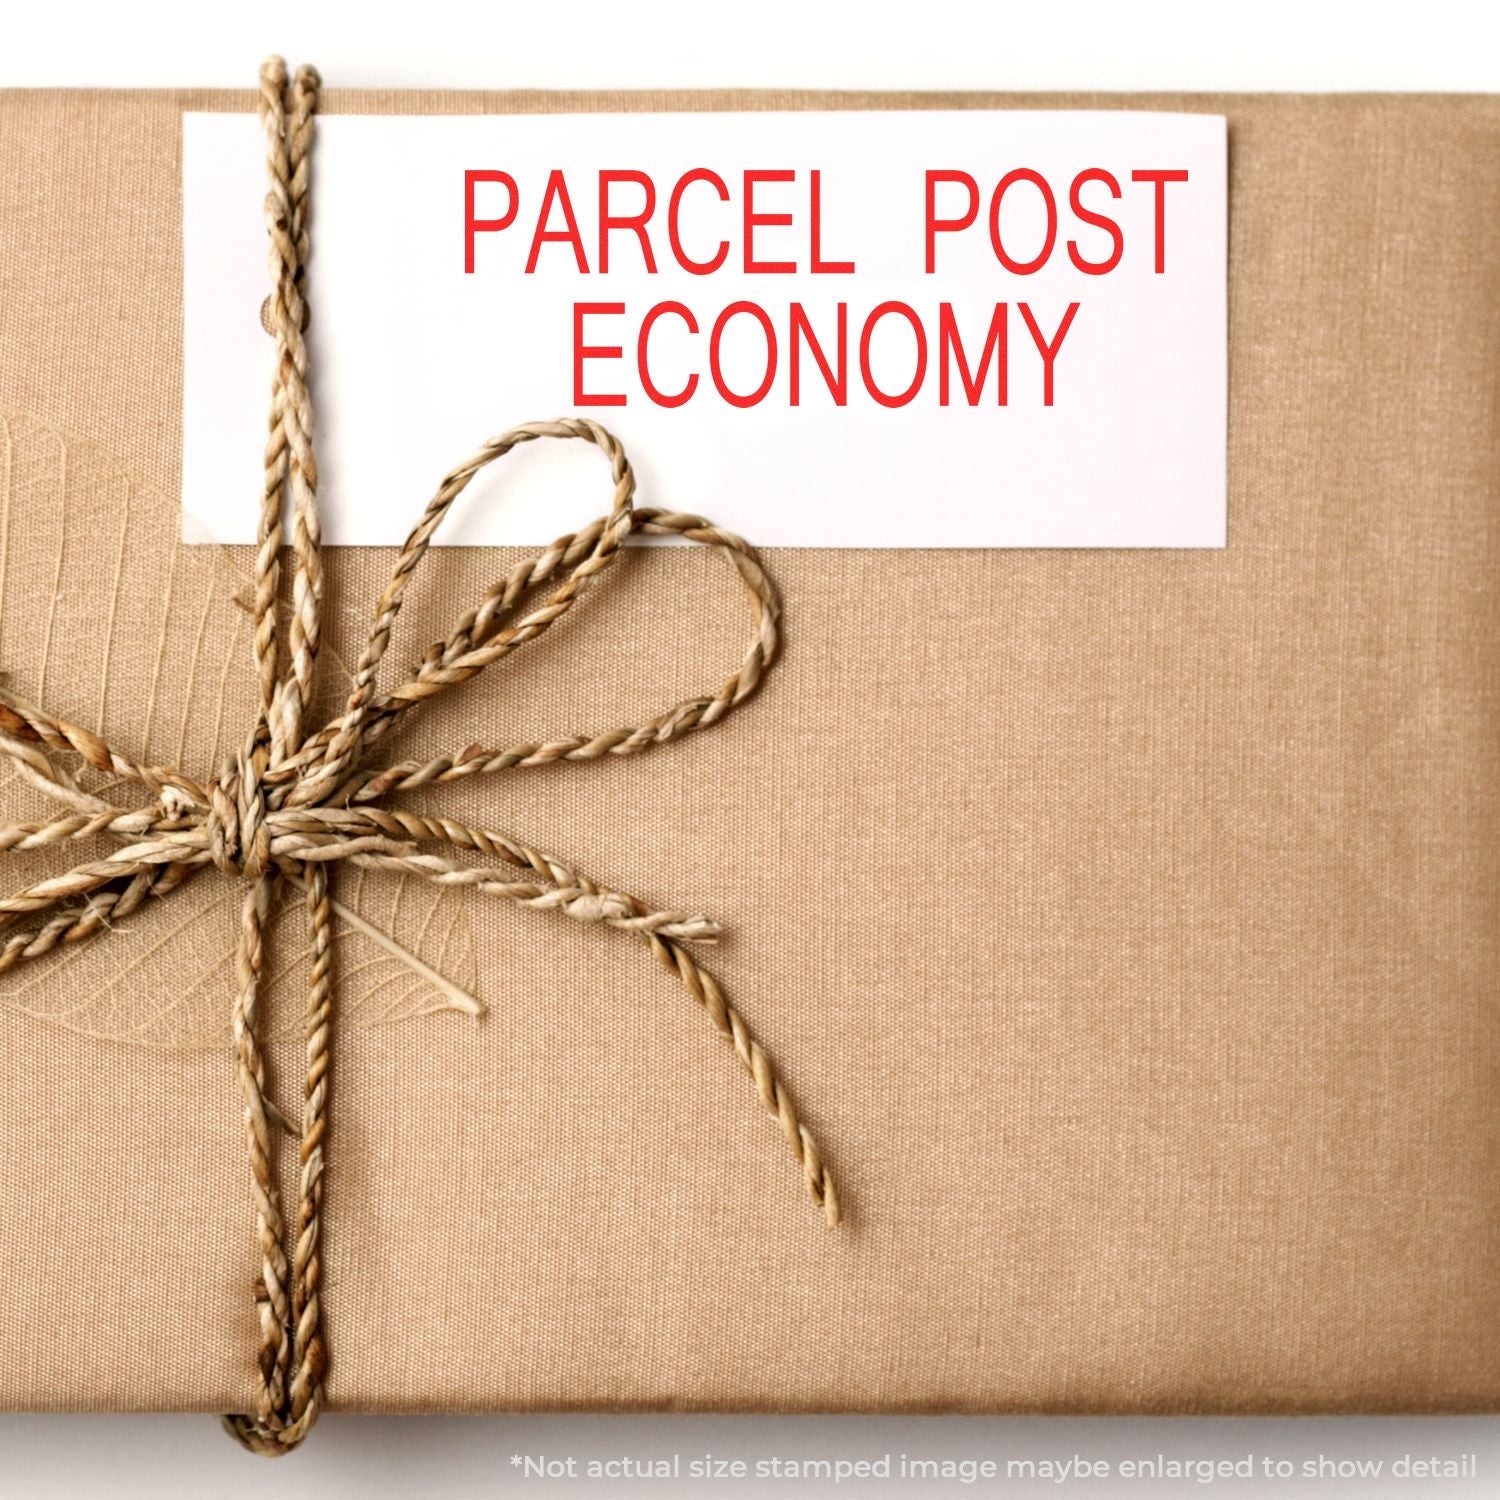 A self-inking stamp with a stamped image showing how the text "PARCEL POST ECONOMY" is displayed after stamping.